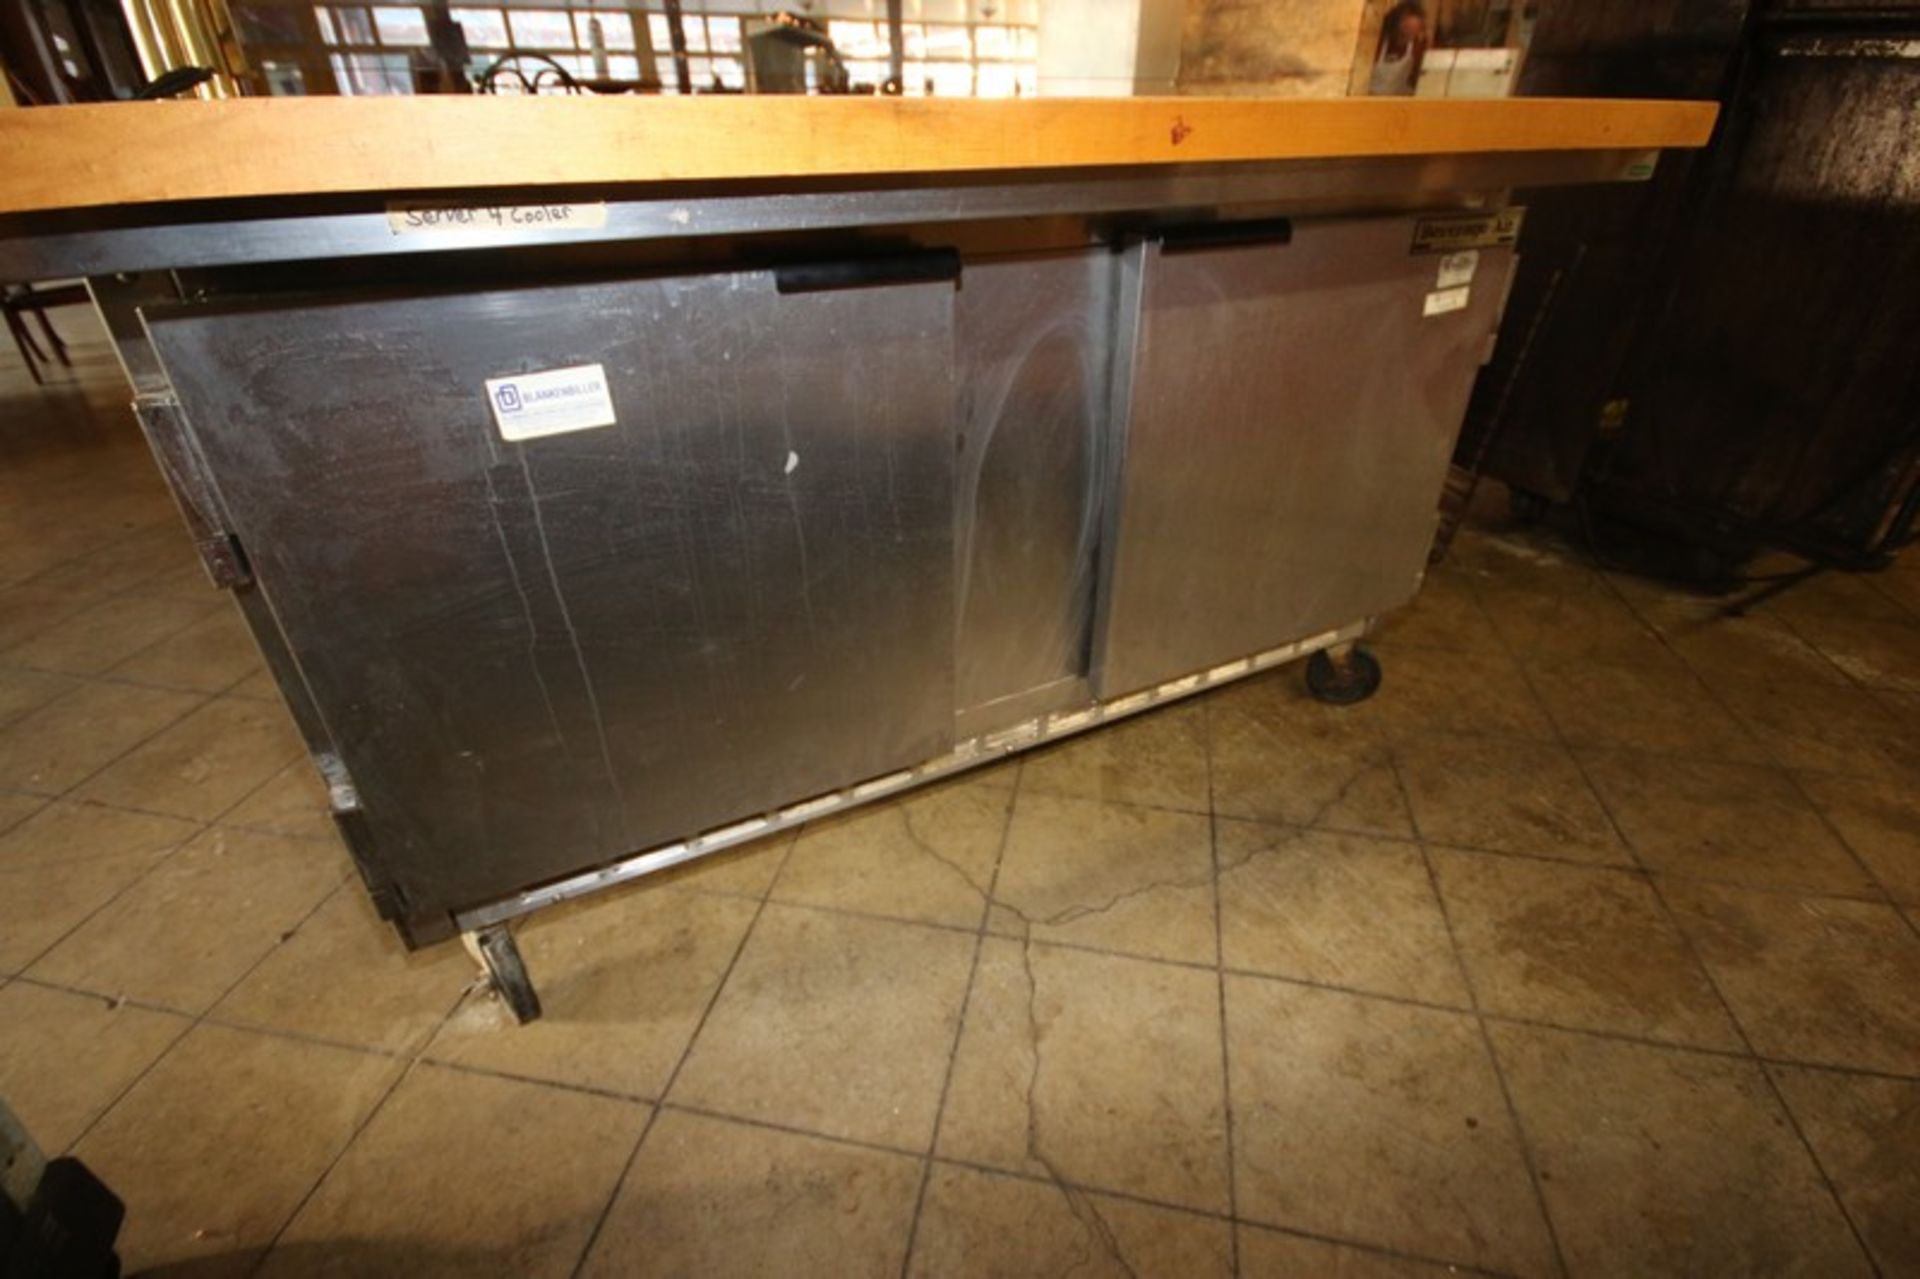 Display Cooler, with Refrigerated Compartment & Glass Display Window, Overall Dims.: Aprox. 60" L - Image 5 of 6